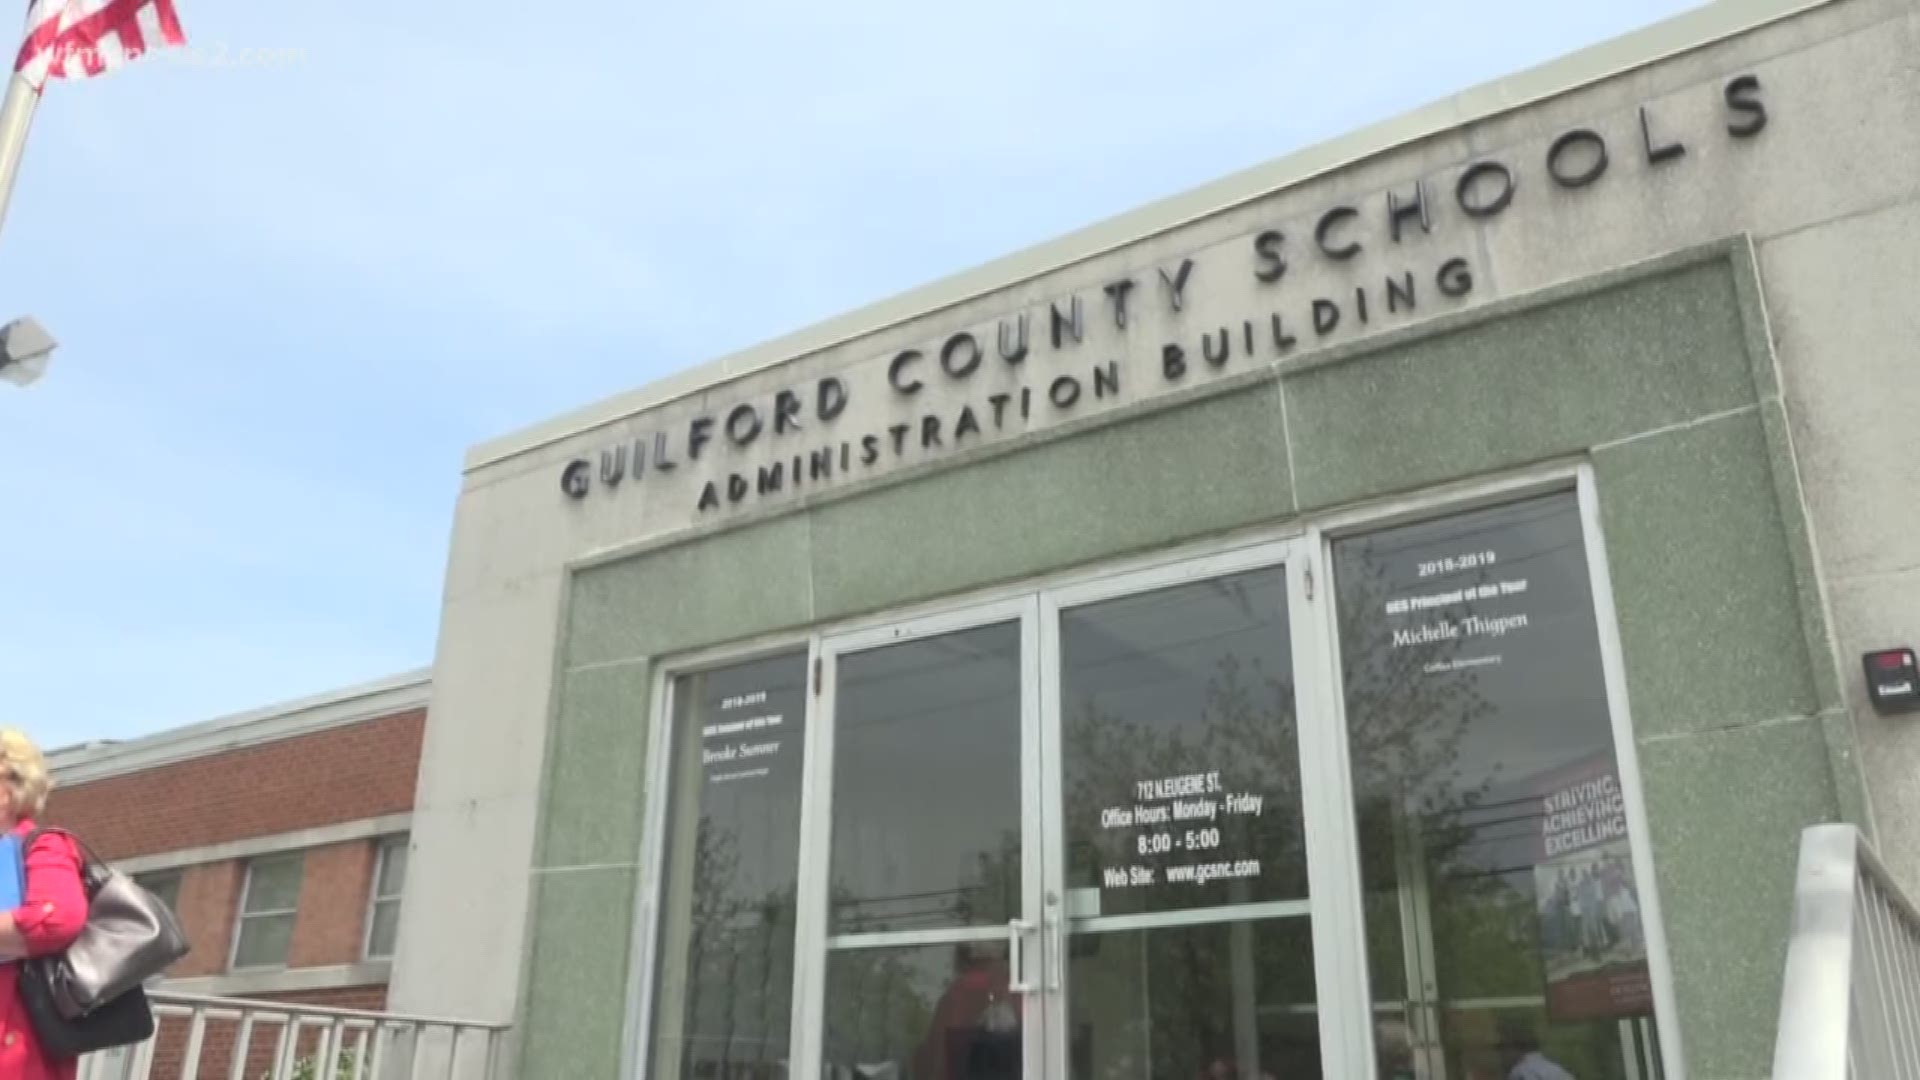 After 25 years, will High Point part from Guilford County Schools? The Mayor of High Point says that could be one option depending on what a study finds.